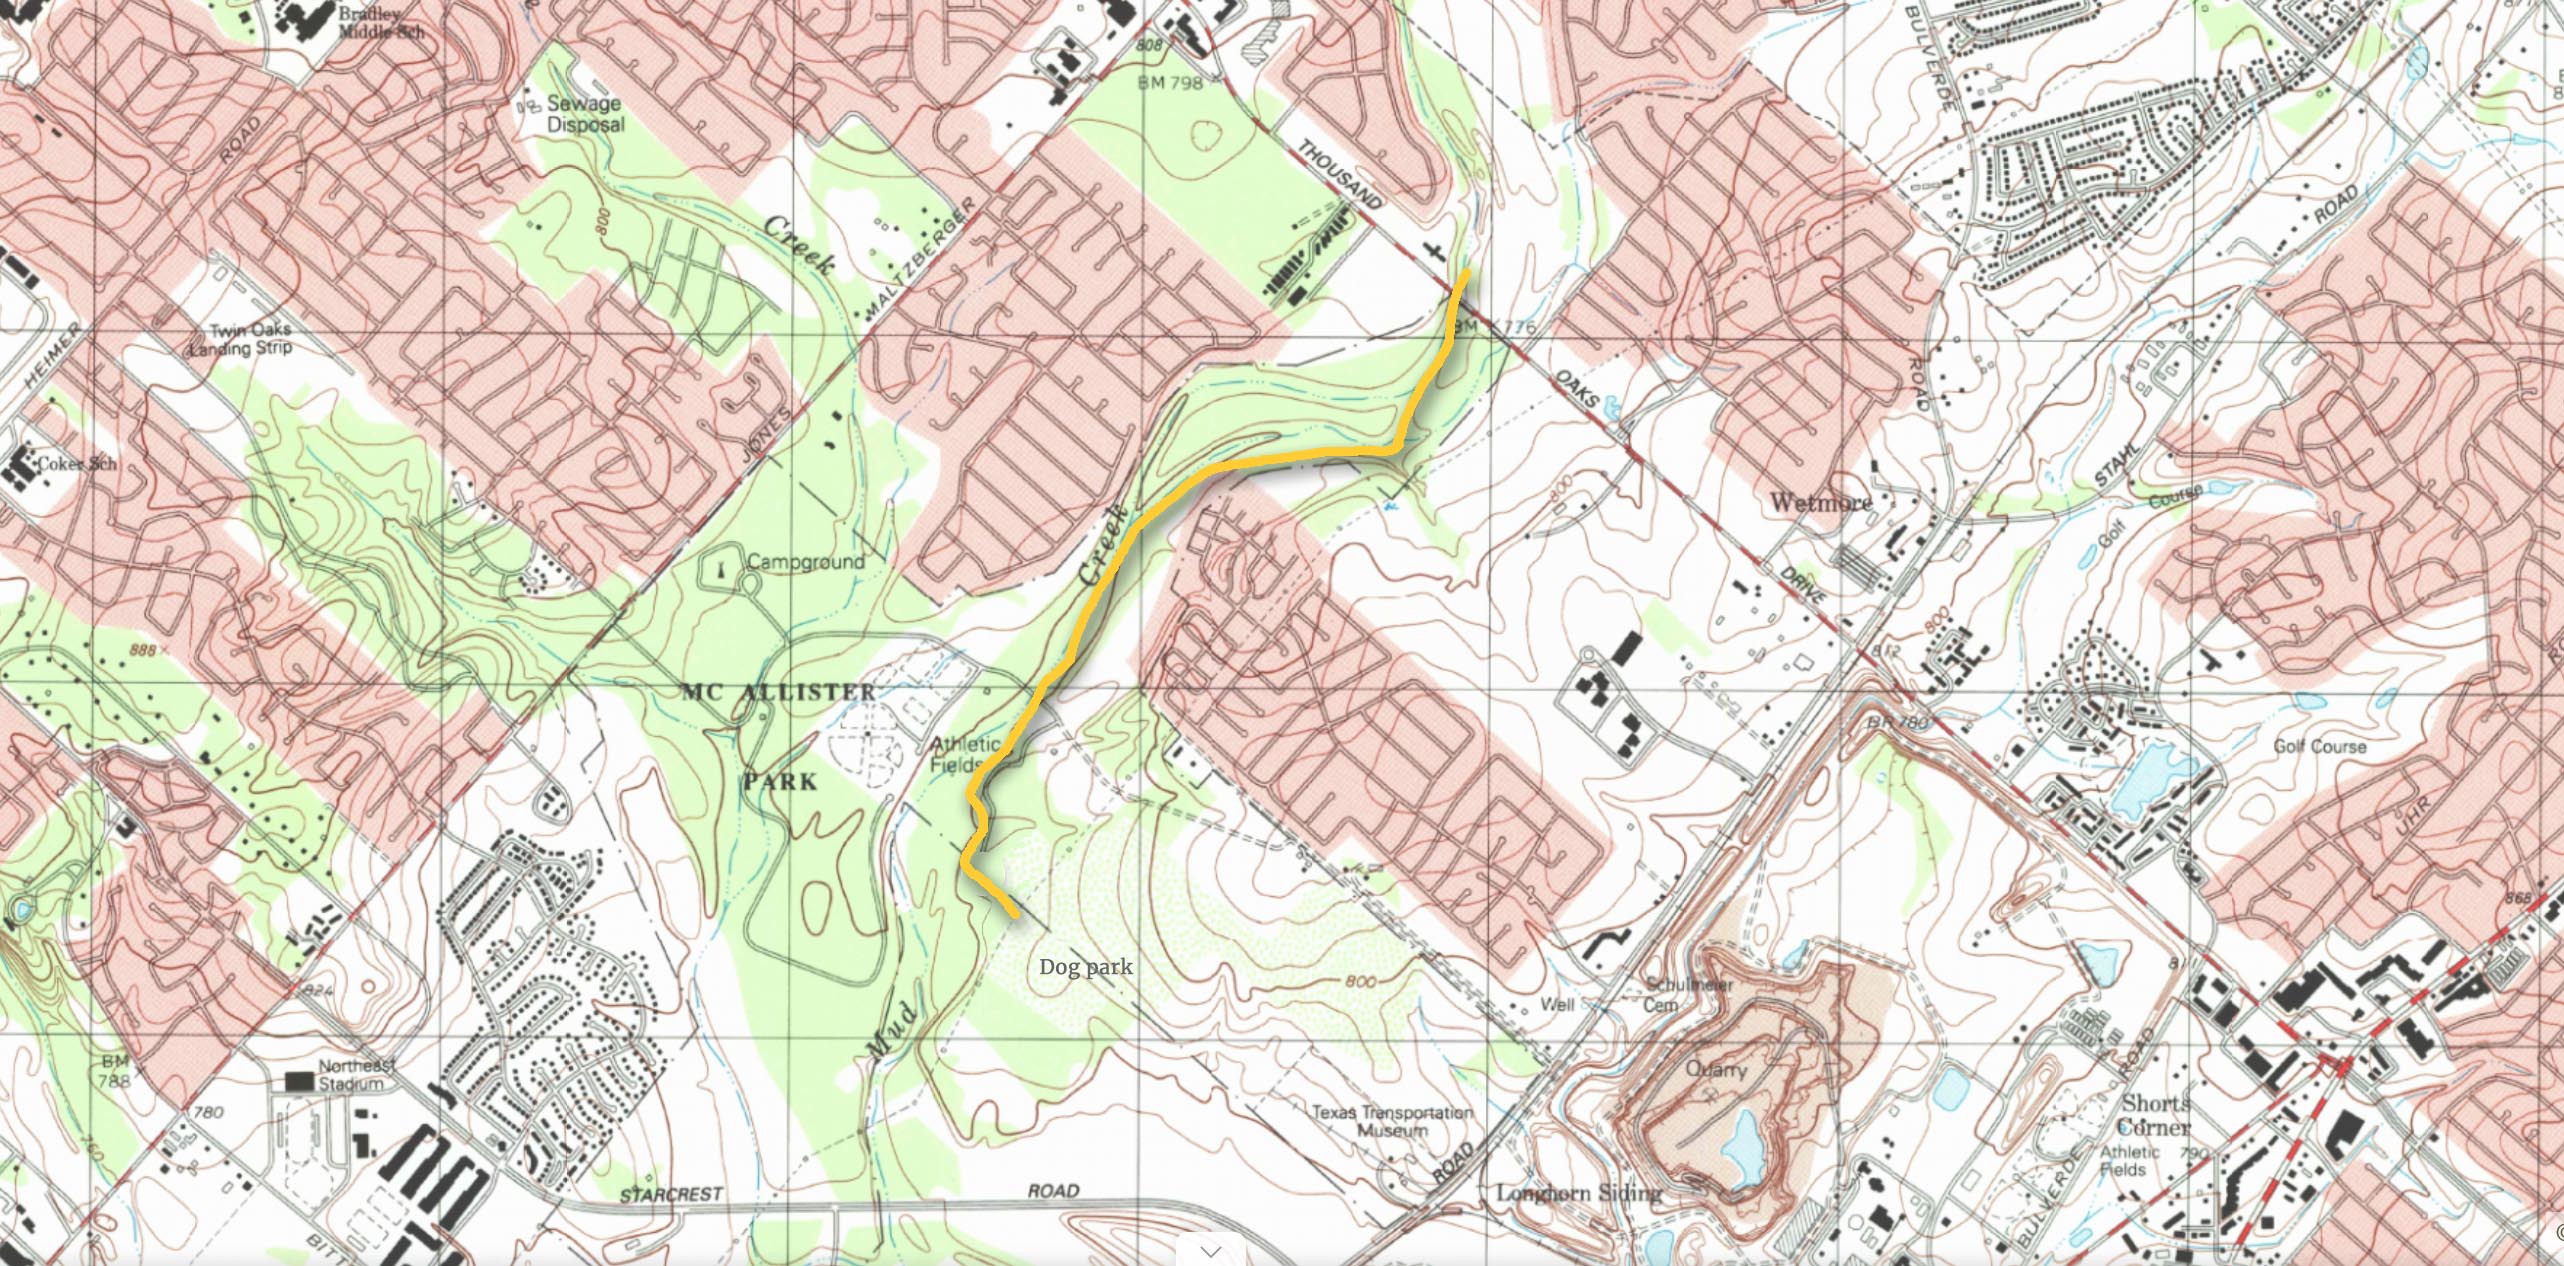 The 1.6 mile (3-km) proposed route runs from the dog park trailhead via a part of the Red Trail and Bee Tree to Thousand Oaks Drive—Map: USGS